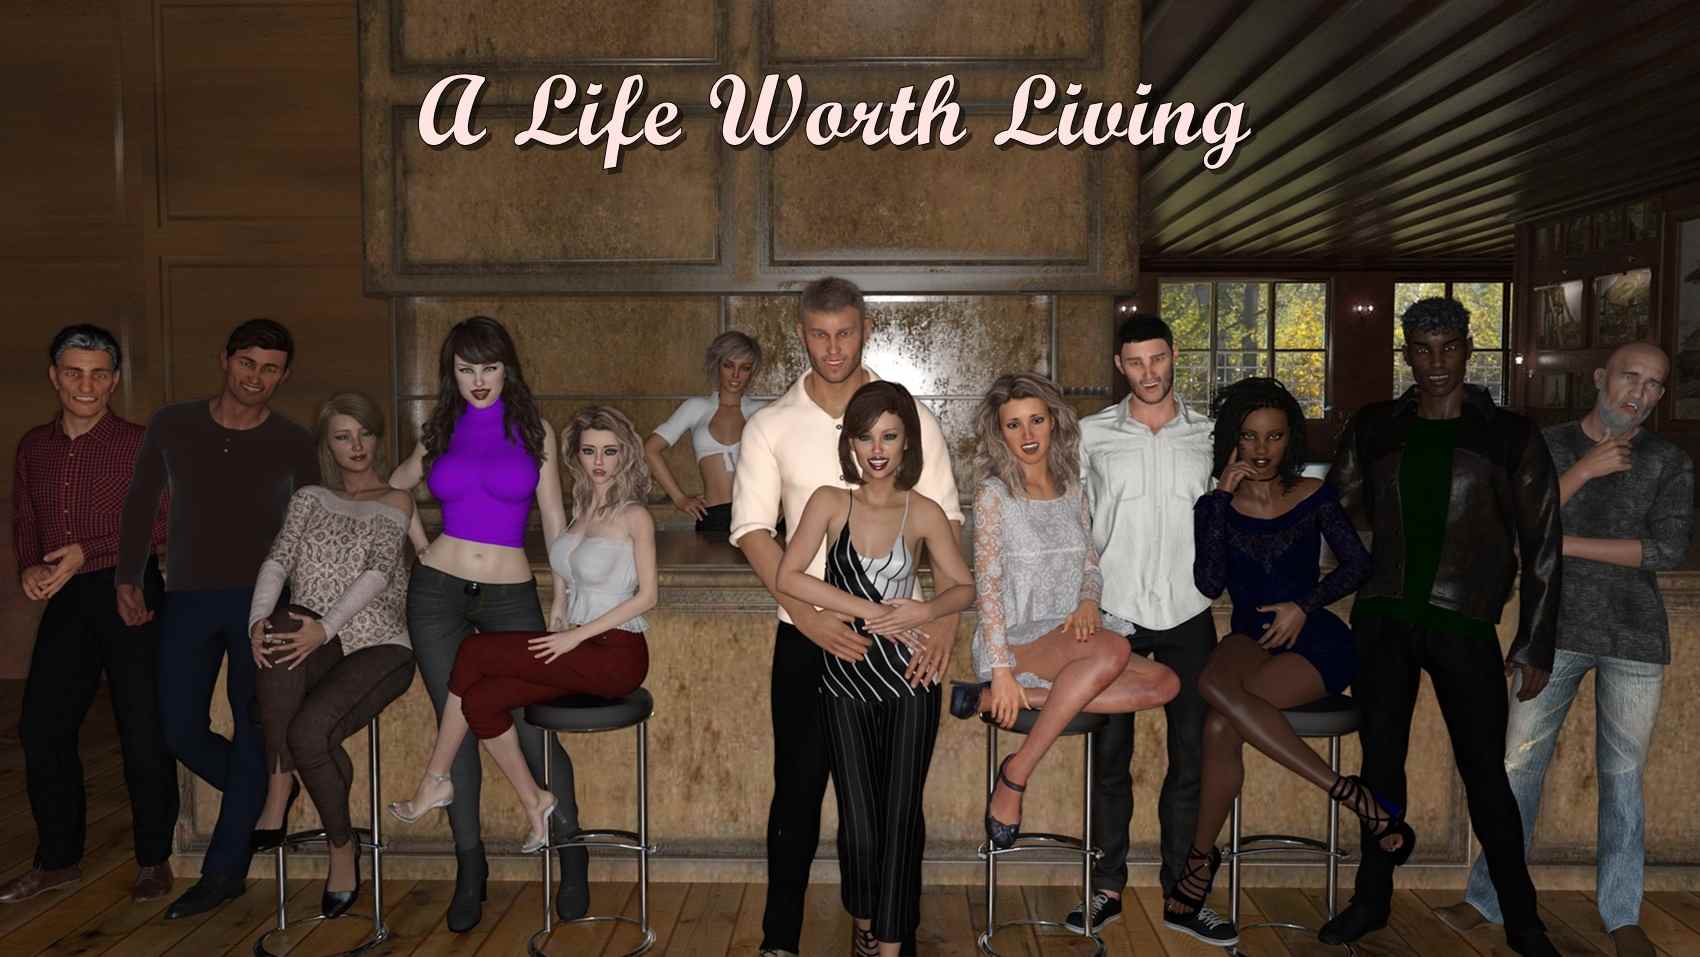 A Life Worth Living – Chapter 4